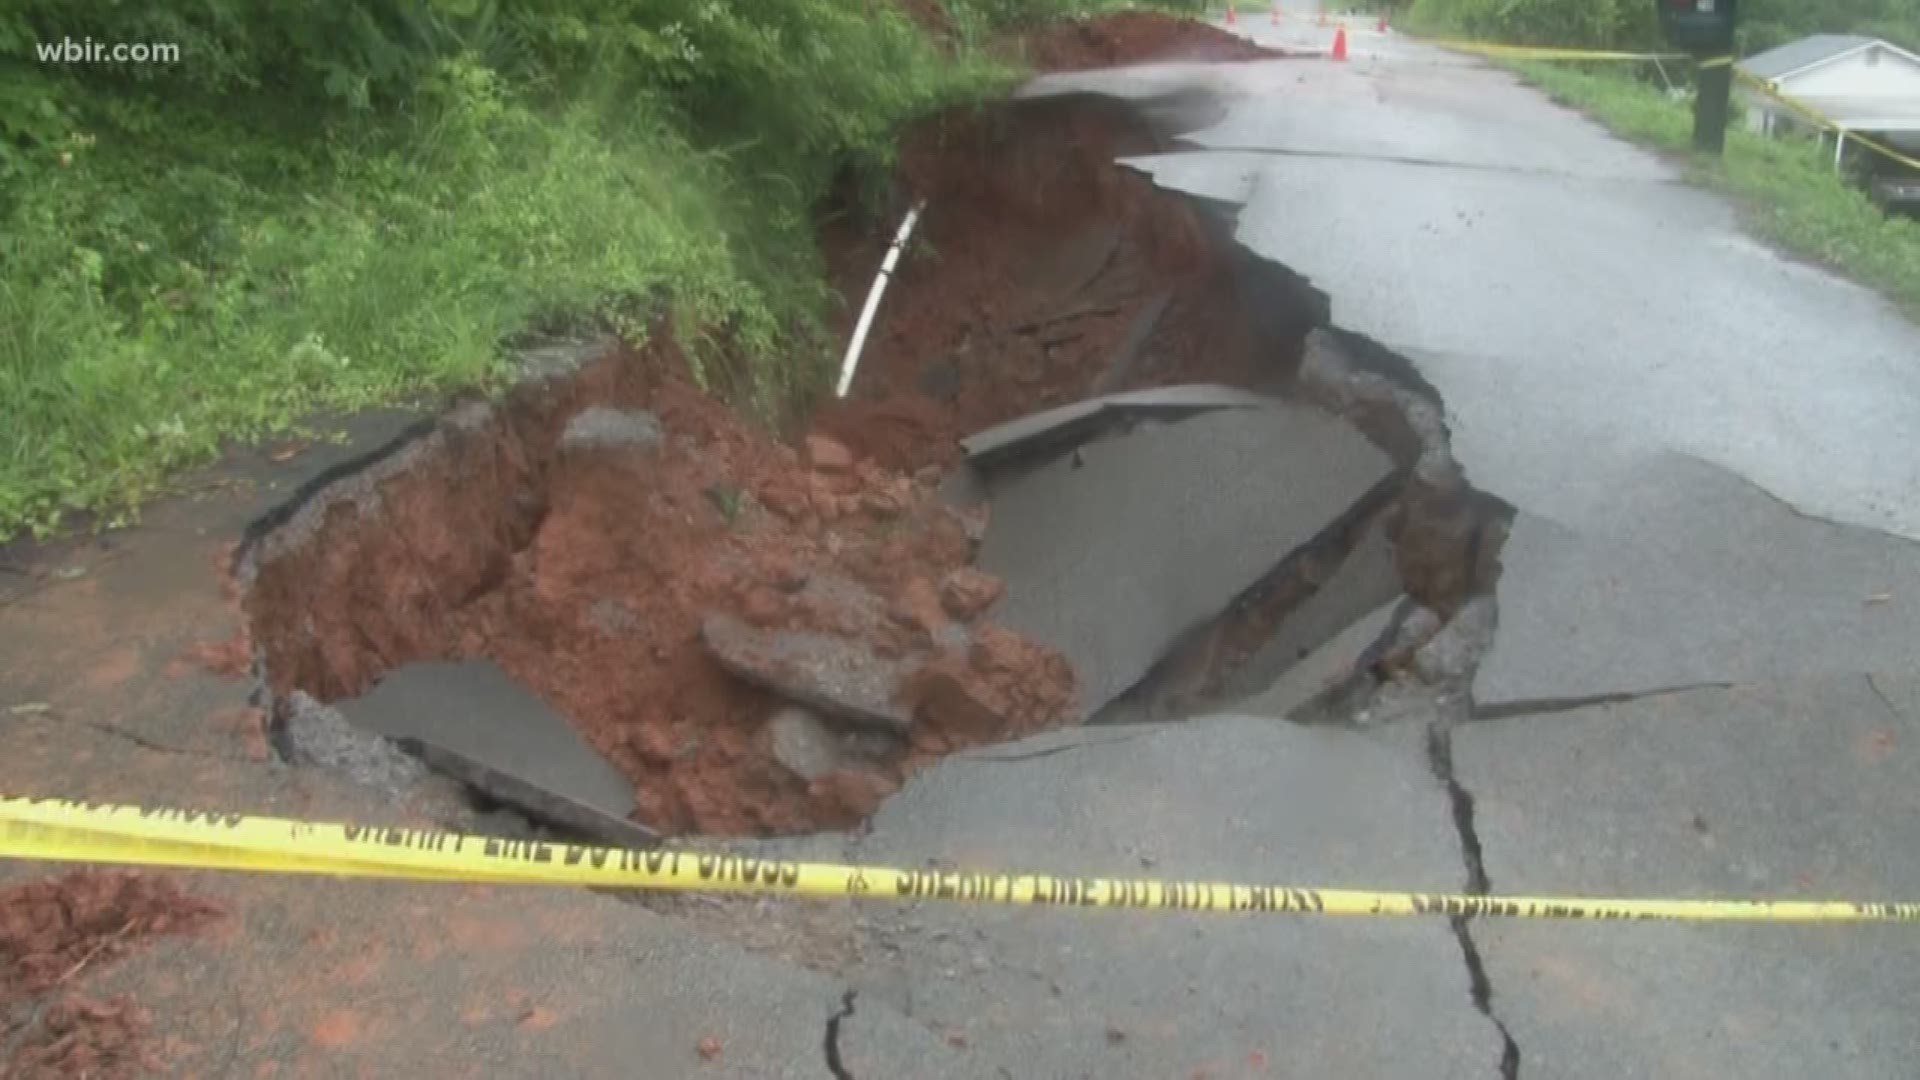 Grainger County is working to fix a sinkhole on Honey Creek Lane that's not allowing neighbors to drive anywhere.